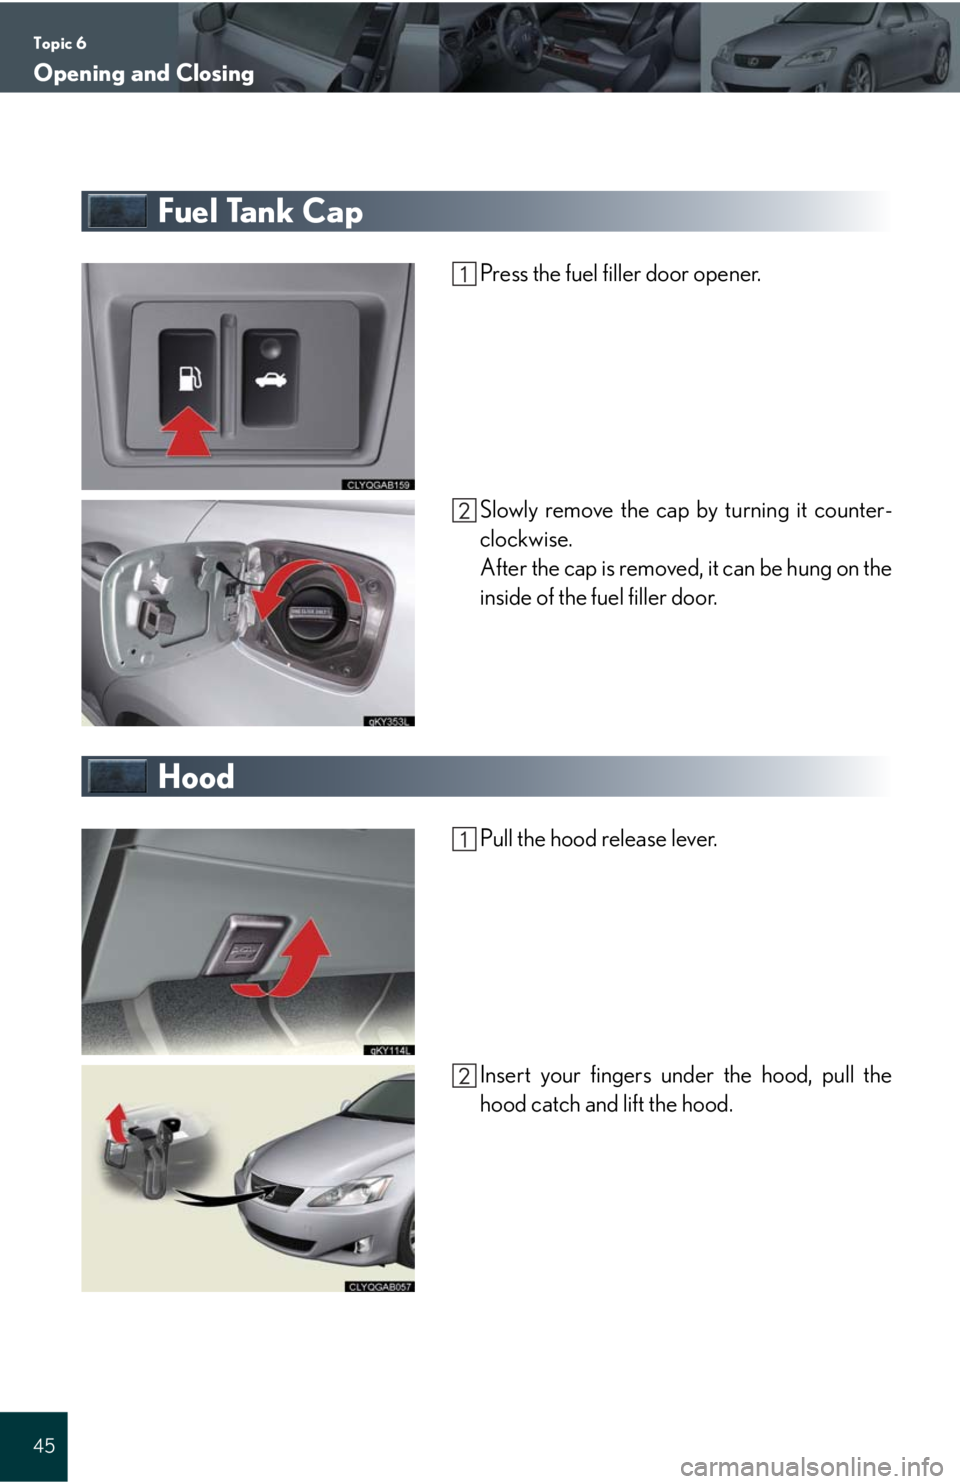 Lexus IS250 2008  Do-it-yourself maintenance / LEXUS 2008 IS 350/250 QUICK GUIDE OWNERS MANUAL (OM60D81U) Topic 6
Opening and Closing
45
Fuel Tank Cap
Press the fuel filler door opener.
Slowly remove the cap by turning it counter-
clockwise.
After the cap is removed, it can be hung on the
inside of the fu